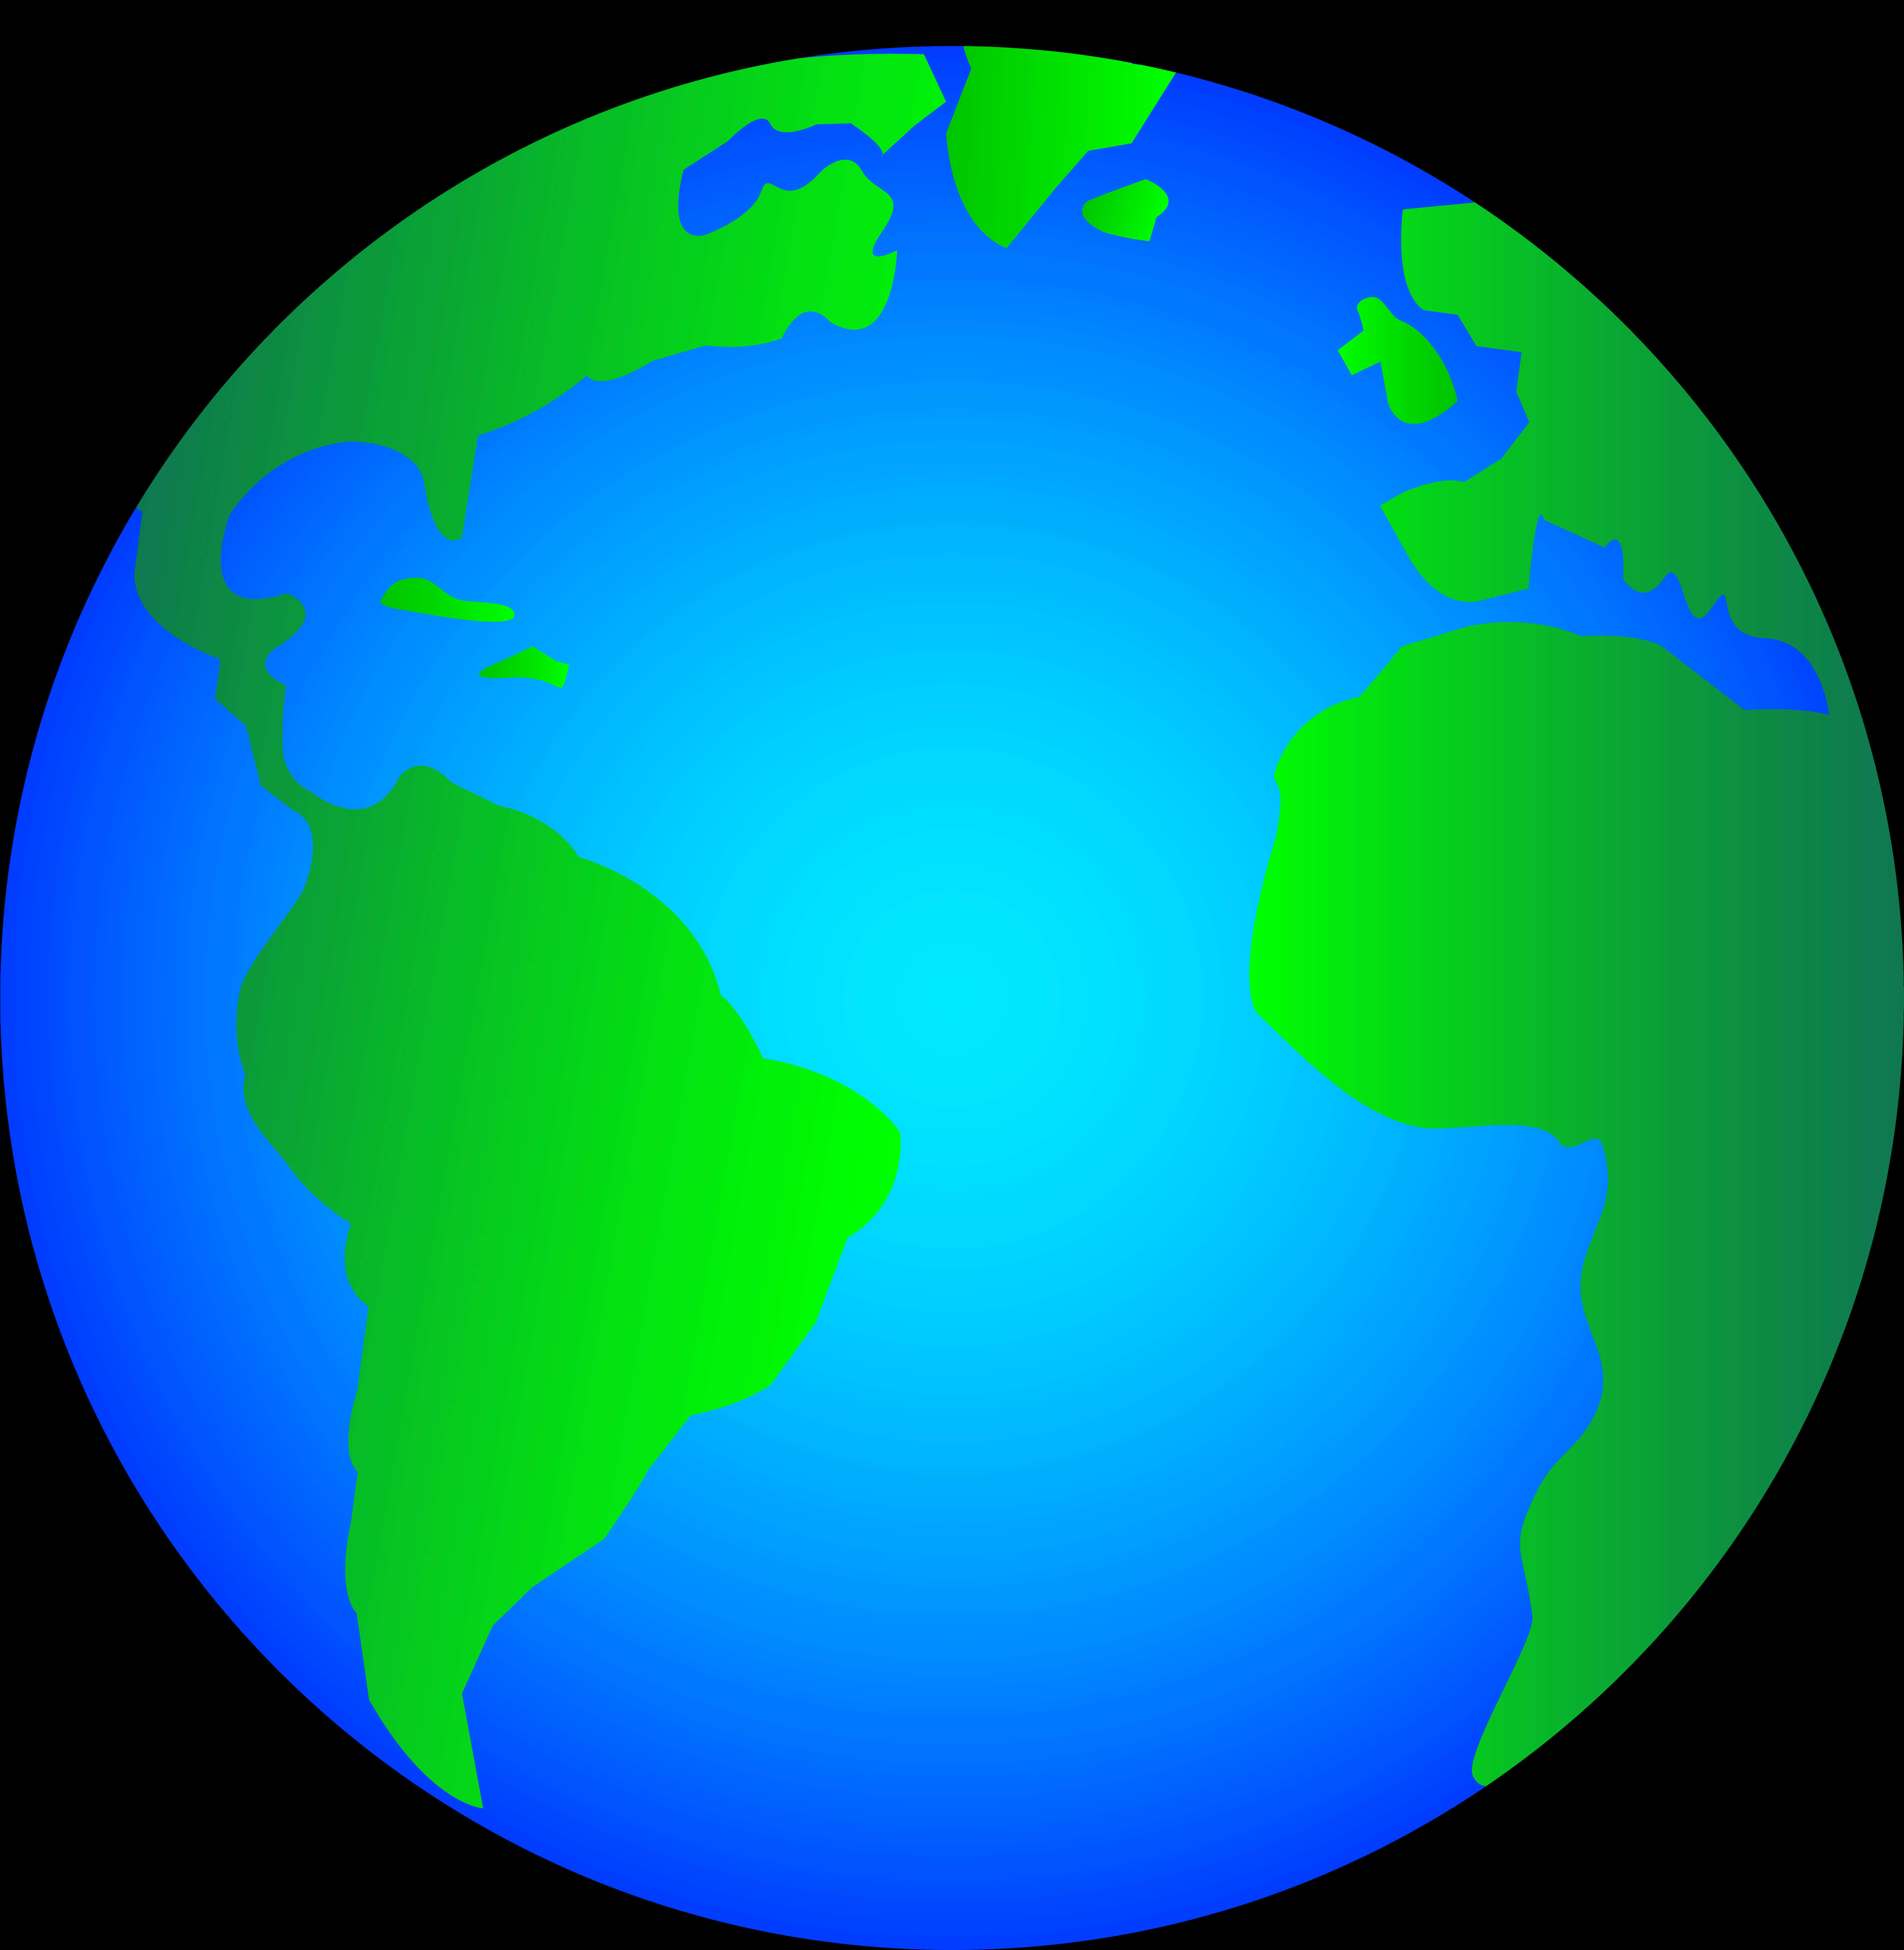 Simplified Vector Globe Graphic